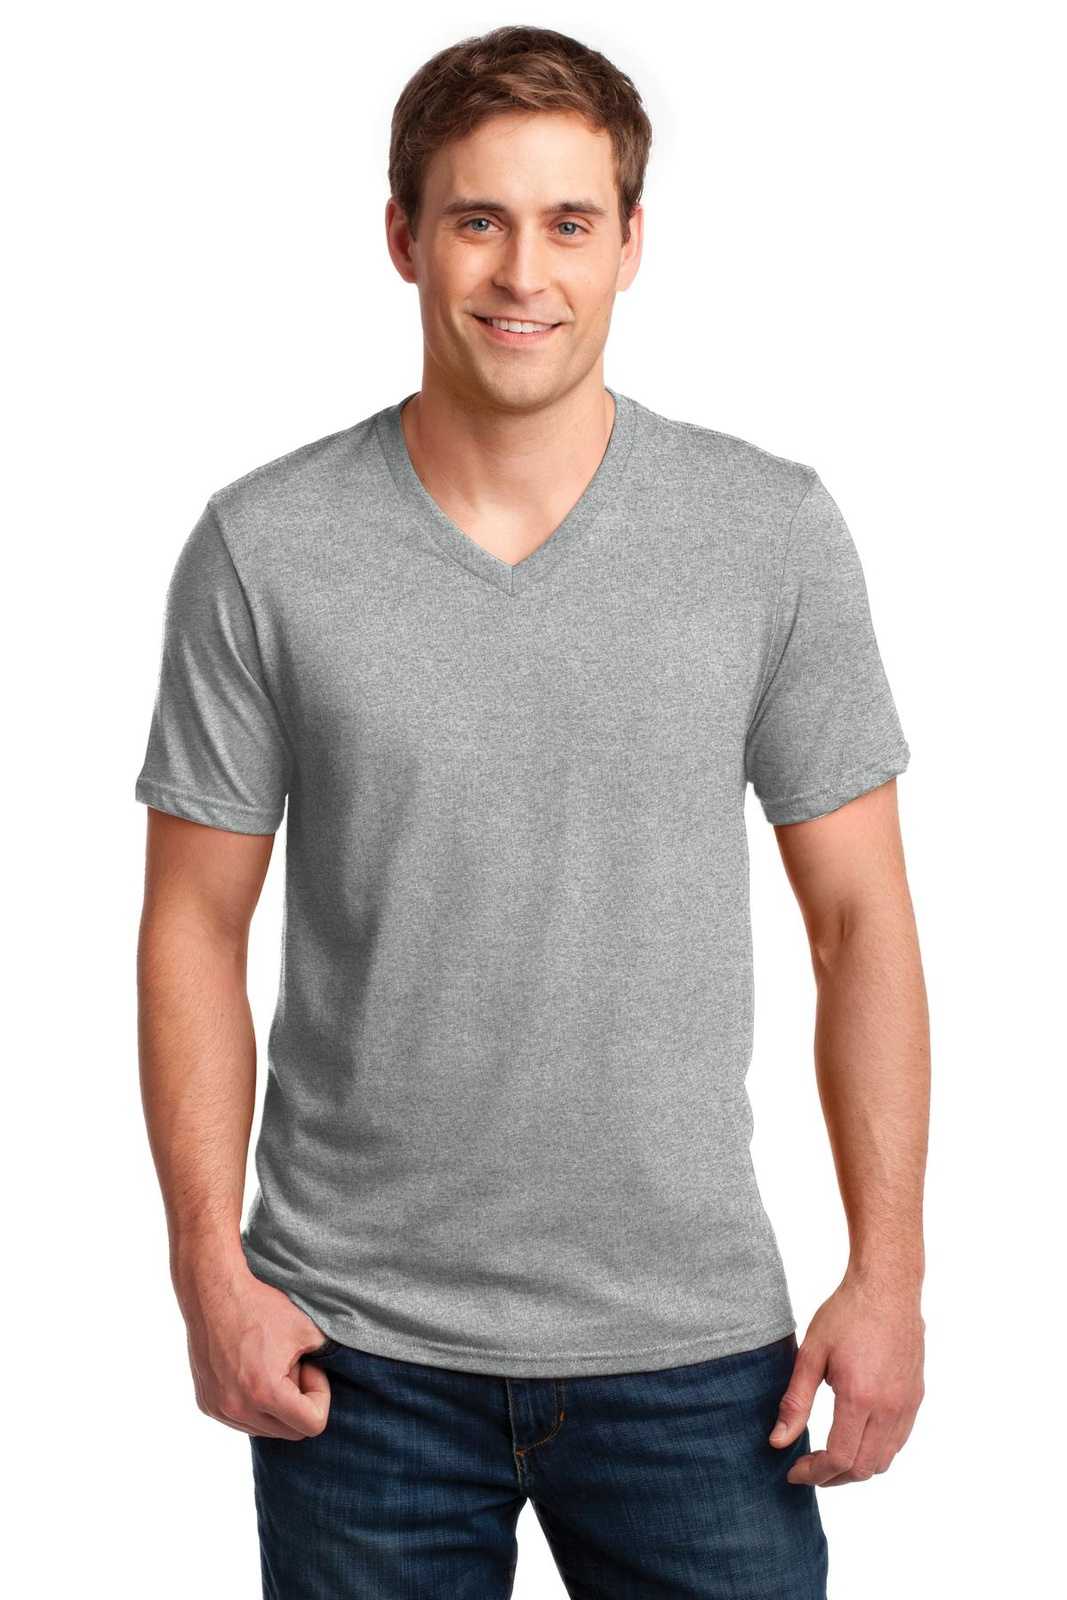 Anvil A982 100% Combed Ring Spun Cotton V-Neck T-Shirt - Heather Gray - HIT a Double